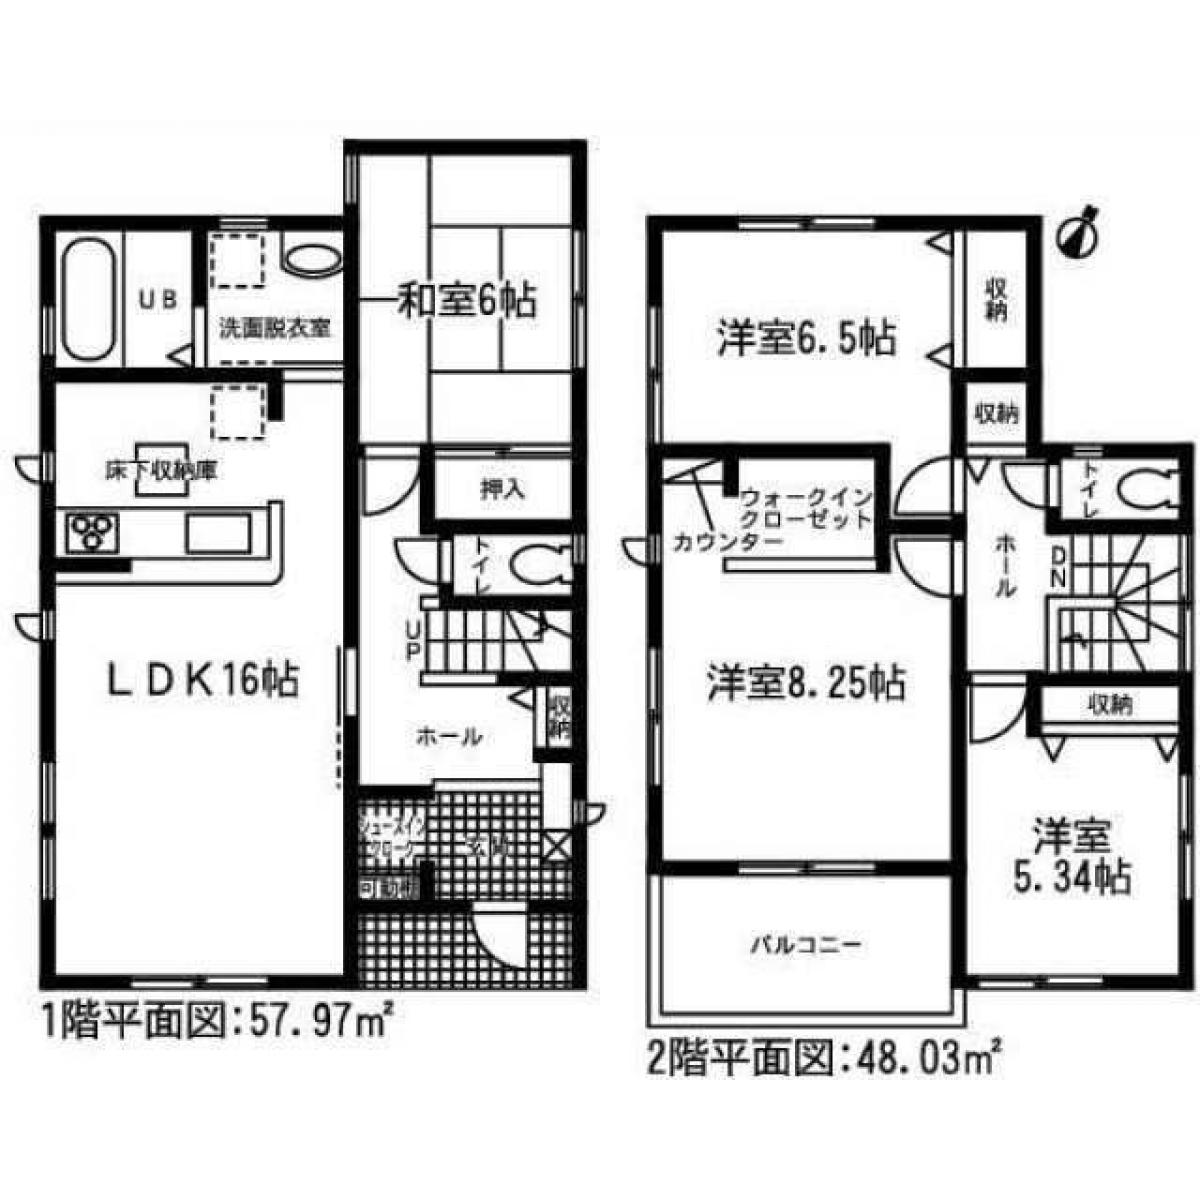 Picture of Home For Sale in Tokai Shi, Aichi, Japan